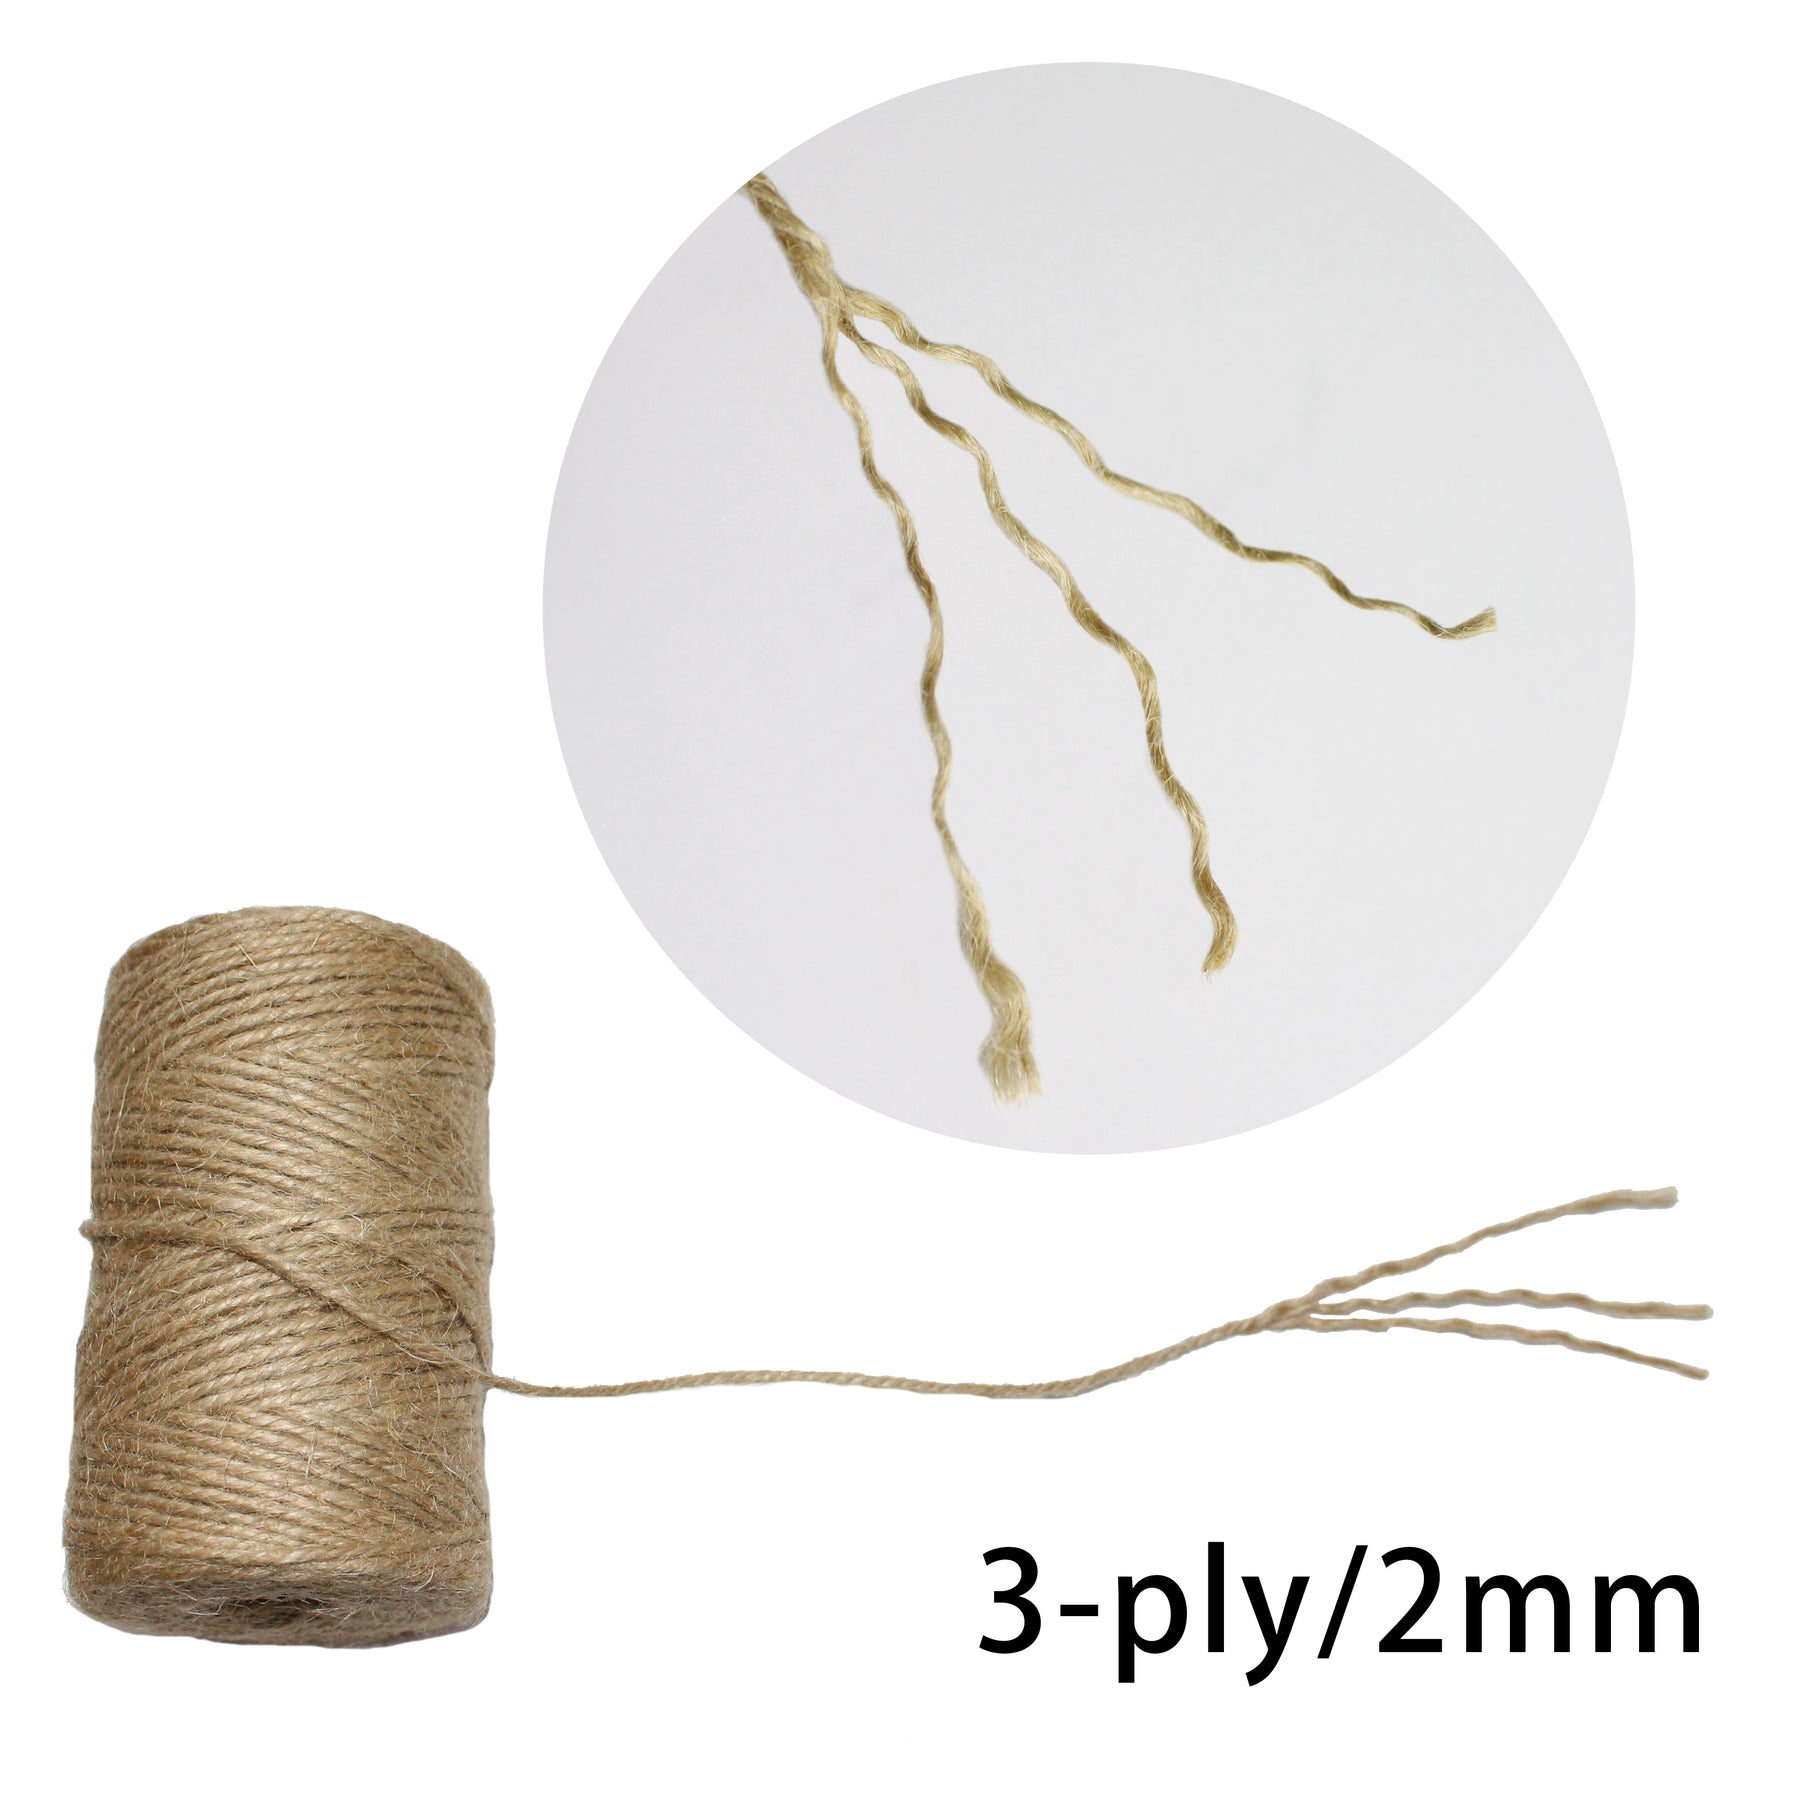 Gardzen Nature Jute Twine 4-Pack, Each Roll Is 328 ft, Natural 3Ply Twisted String Rope for Toys Craft Gift DIY Gardening, Women's, Size: One size